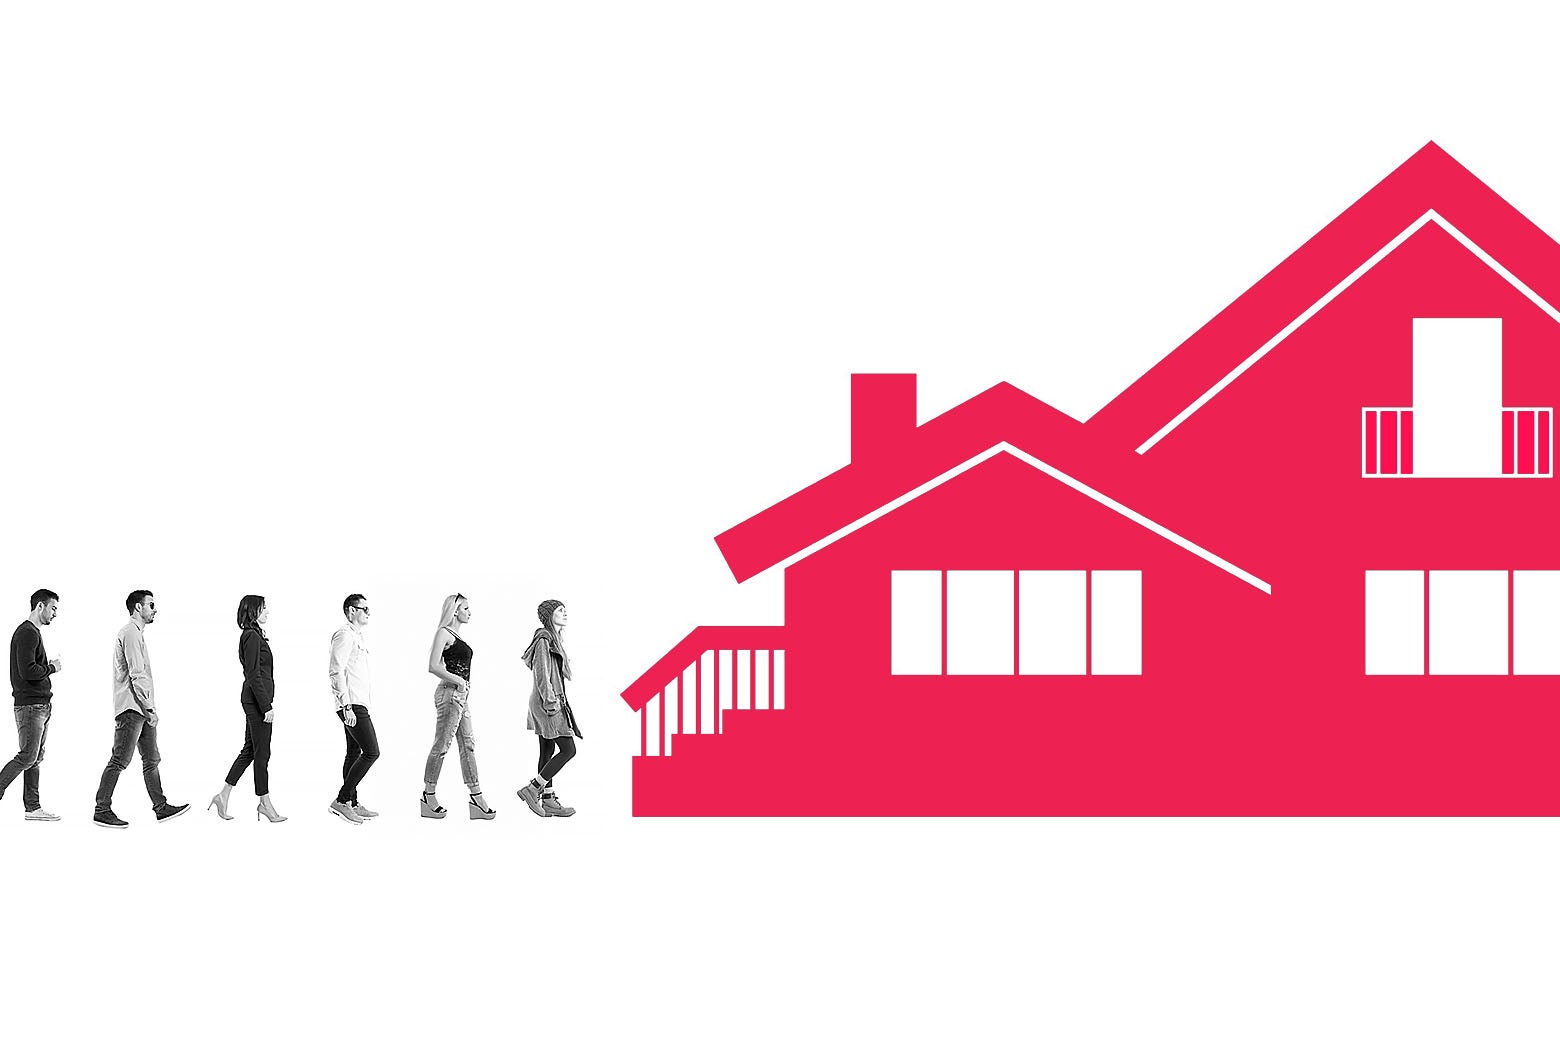 A line of people walking single file up to an illustrated house